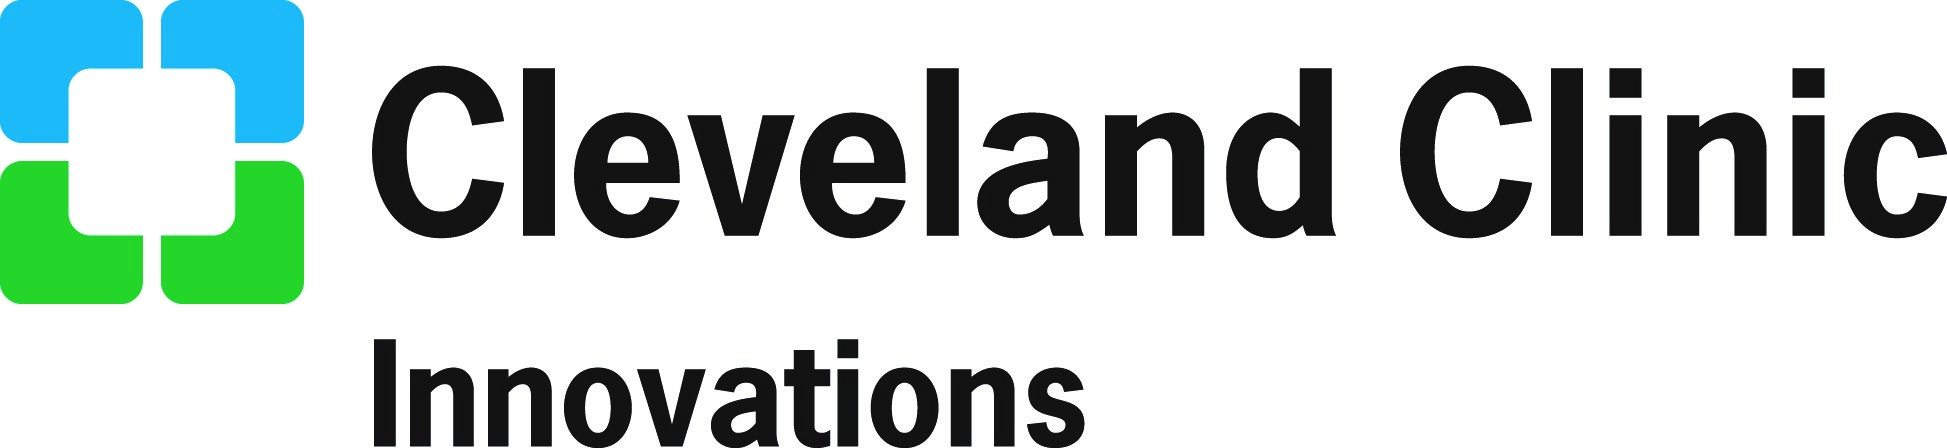 Cleveland Clinic Innovations